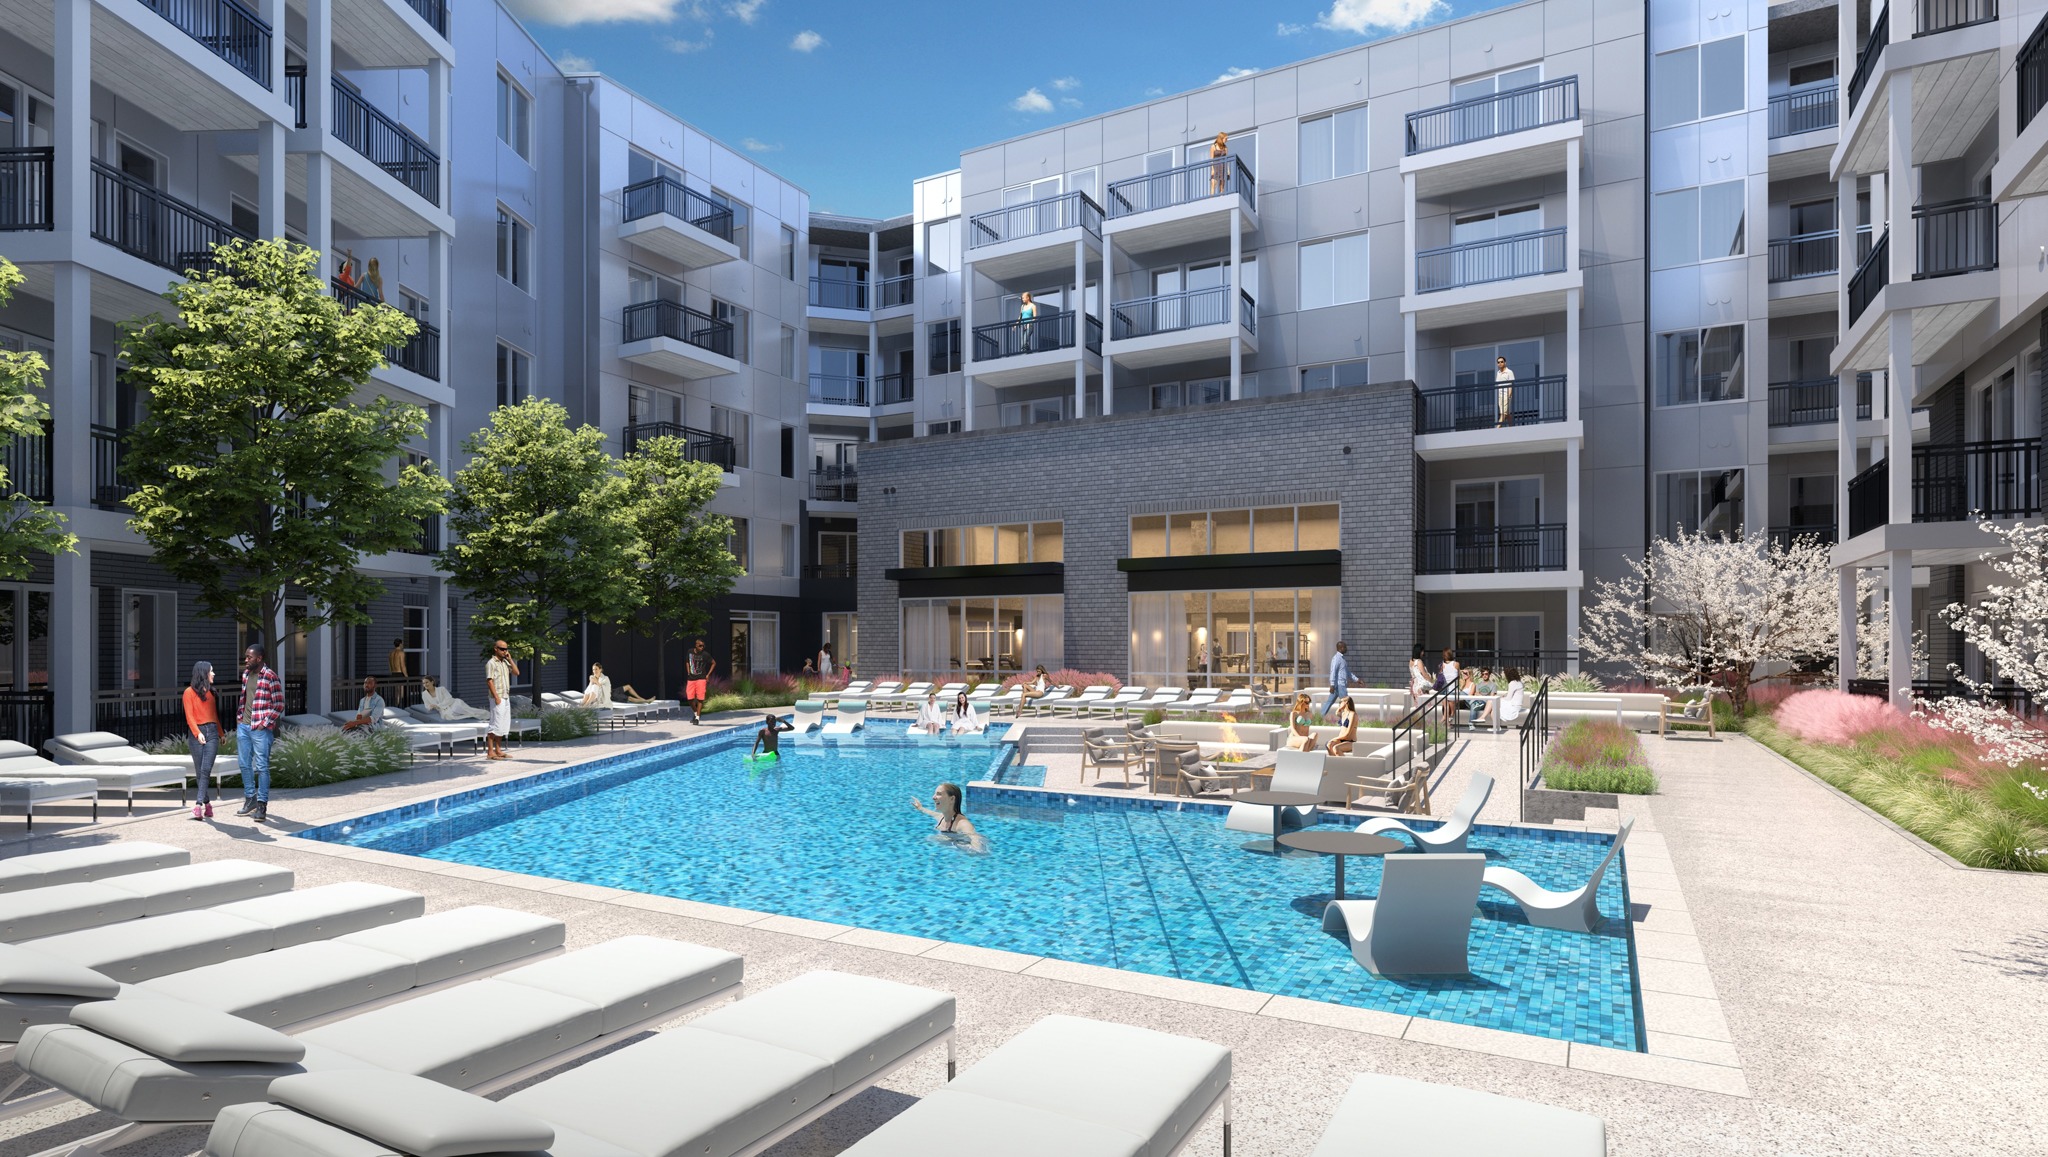 Modera Germantown Nashville Tennessee apartments exterior rendering of pool